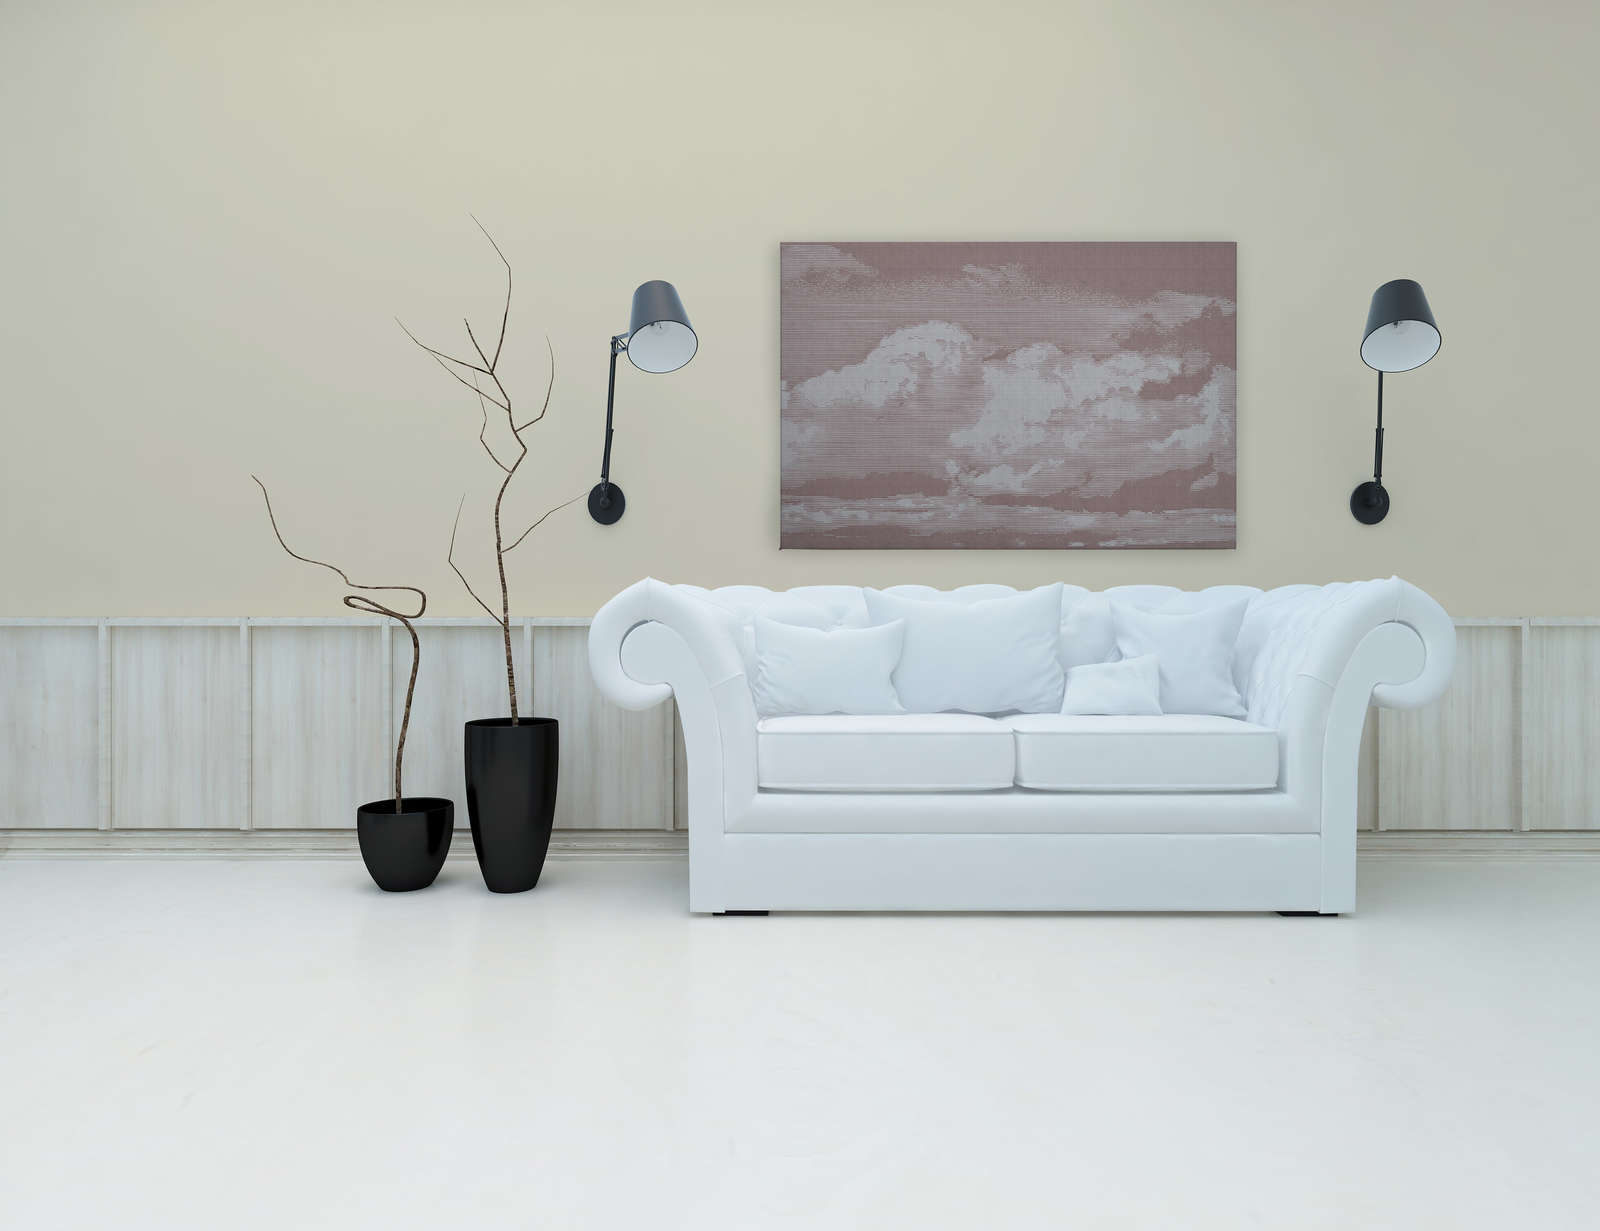             Clouds 3 - Heavenly canvas picture with cloud motif - Nature linen look - 1.20 m x 0.80 m
        